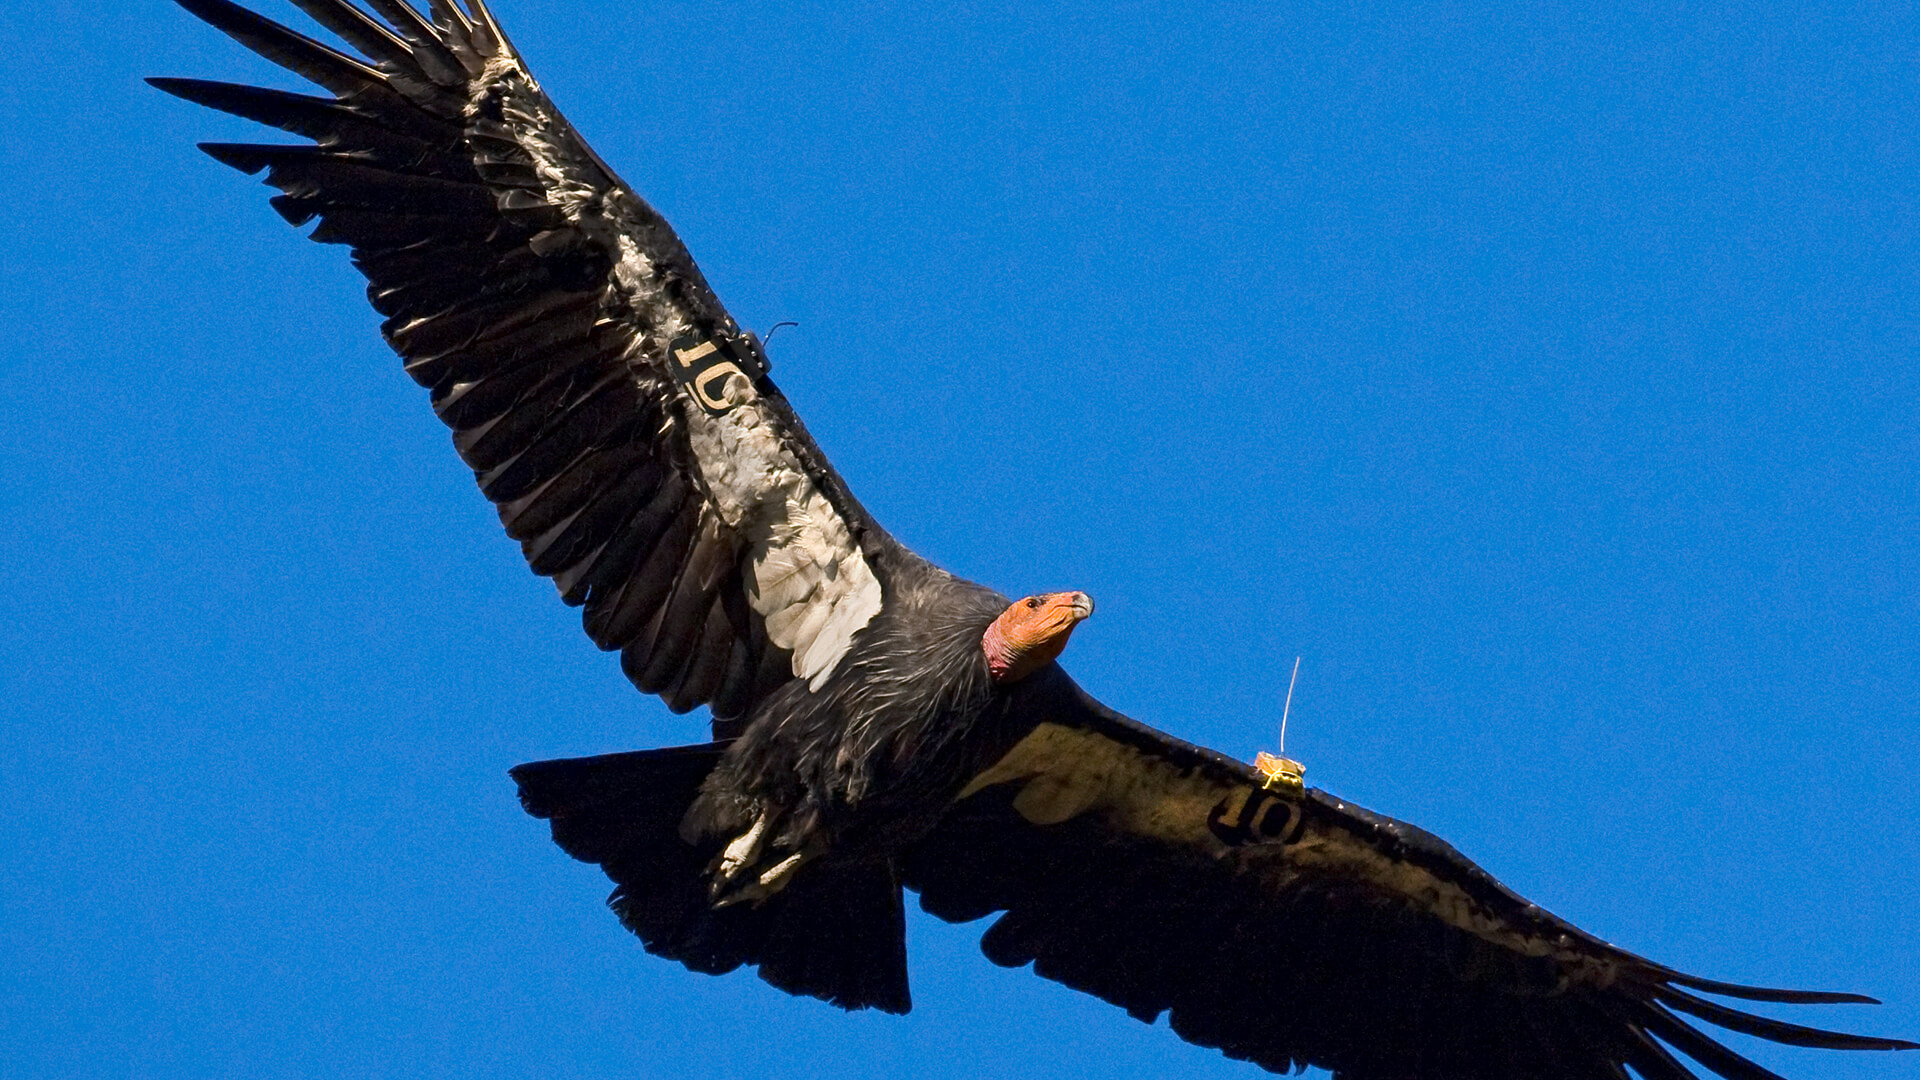 California Condor with radio tracking devices on its wings